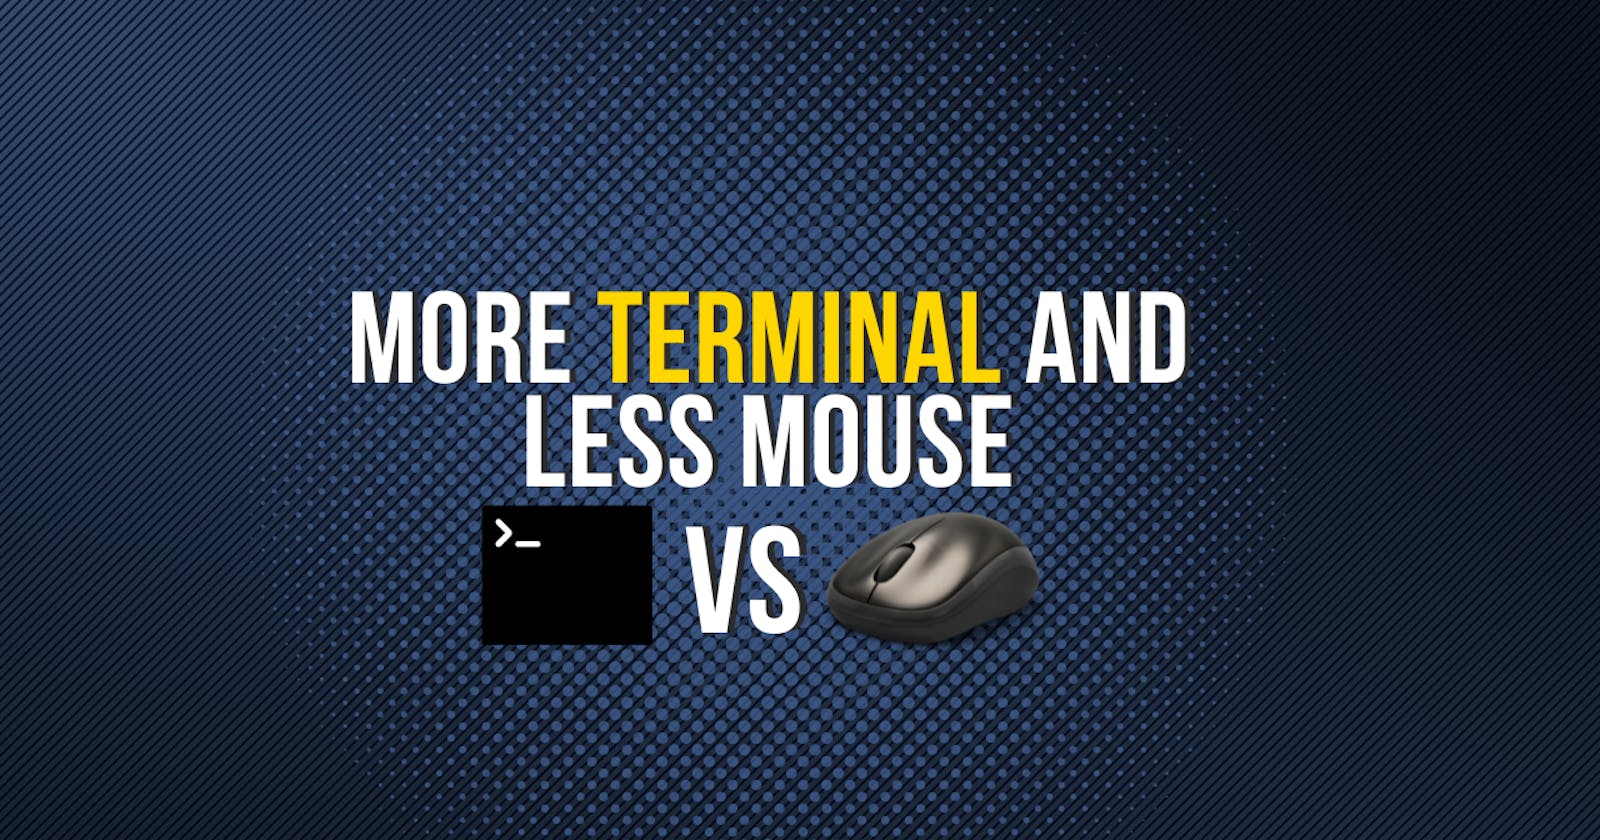 Improve your productivity by using more terminal and less mouse.